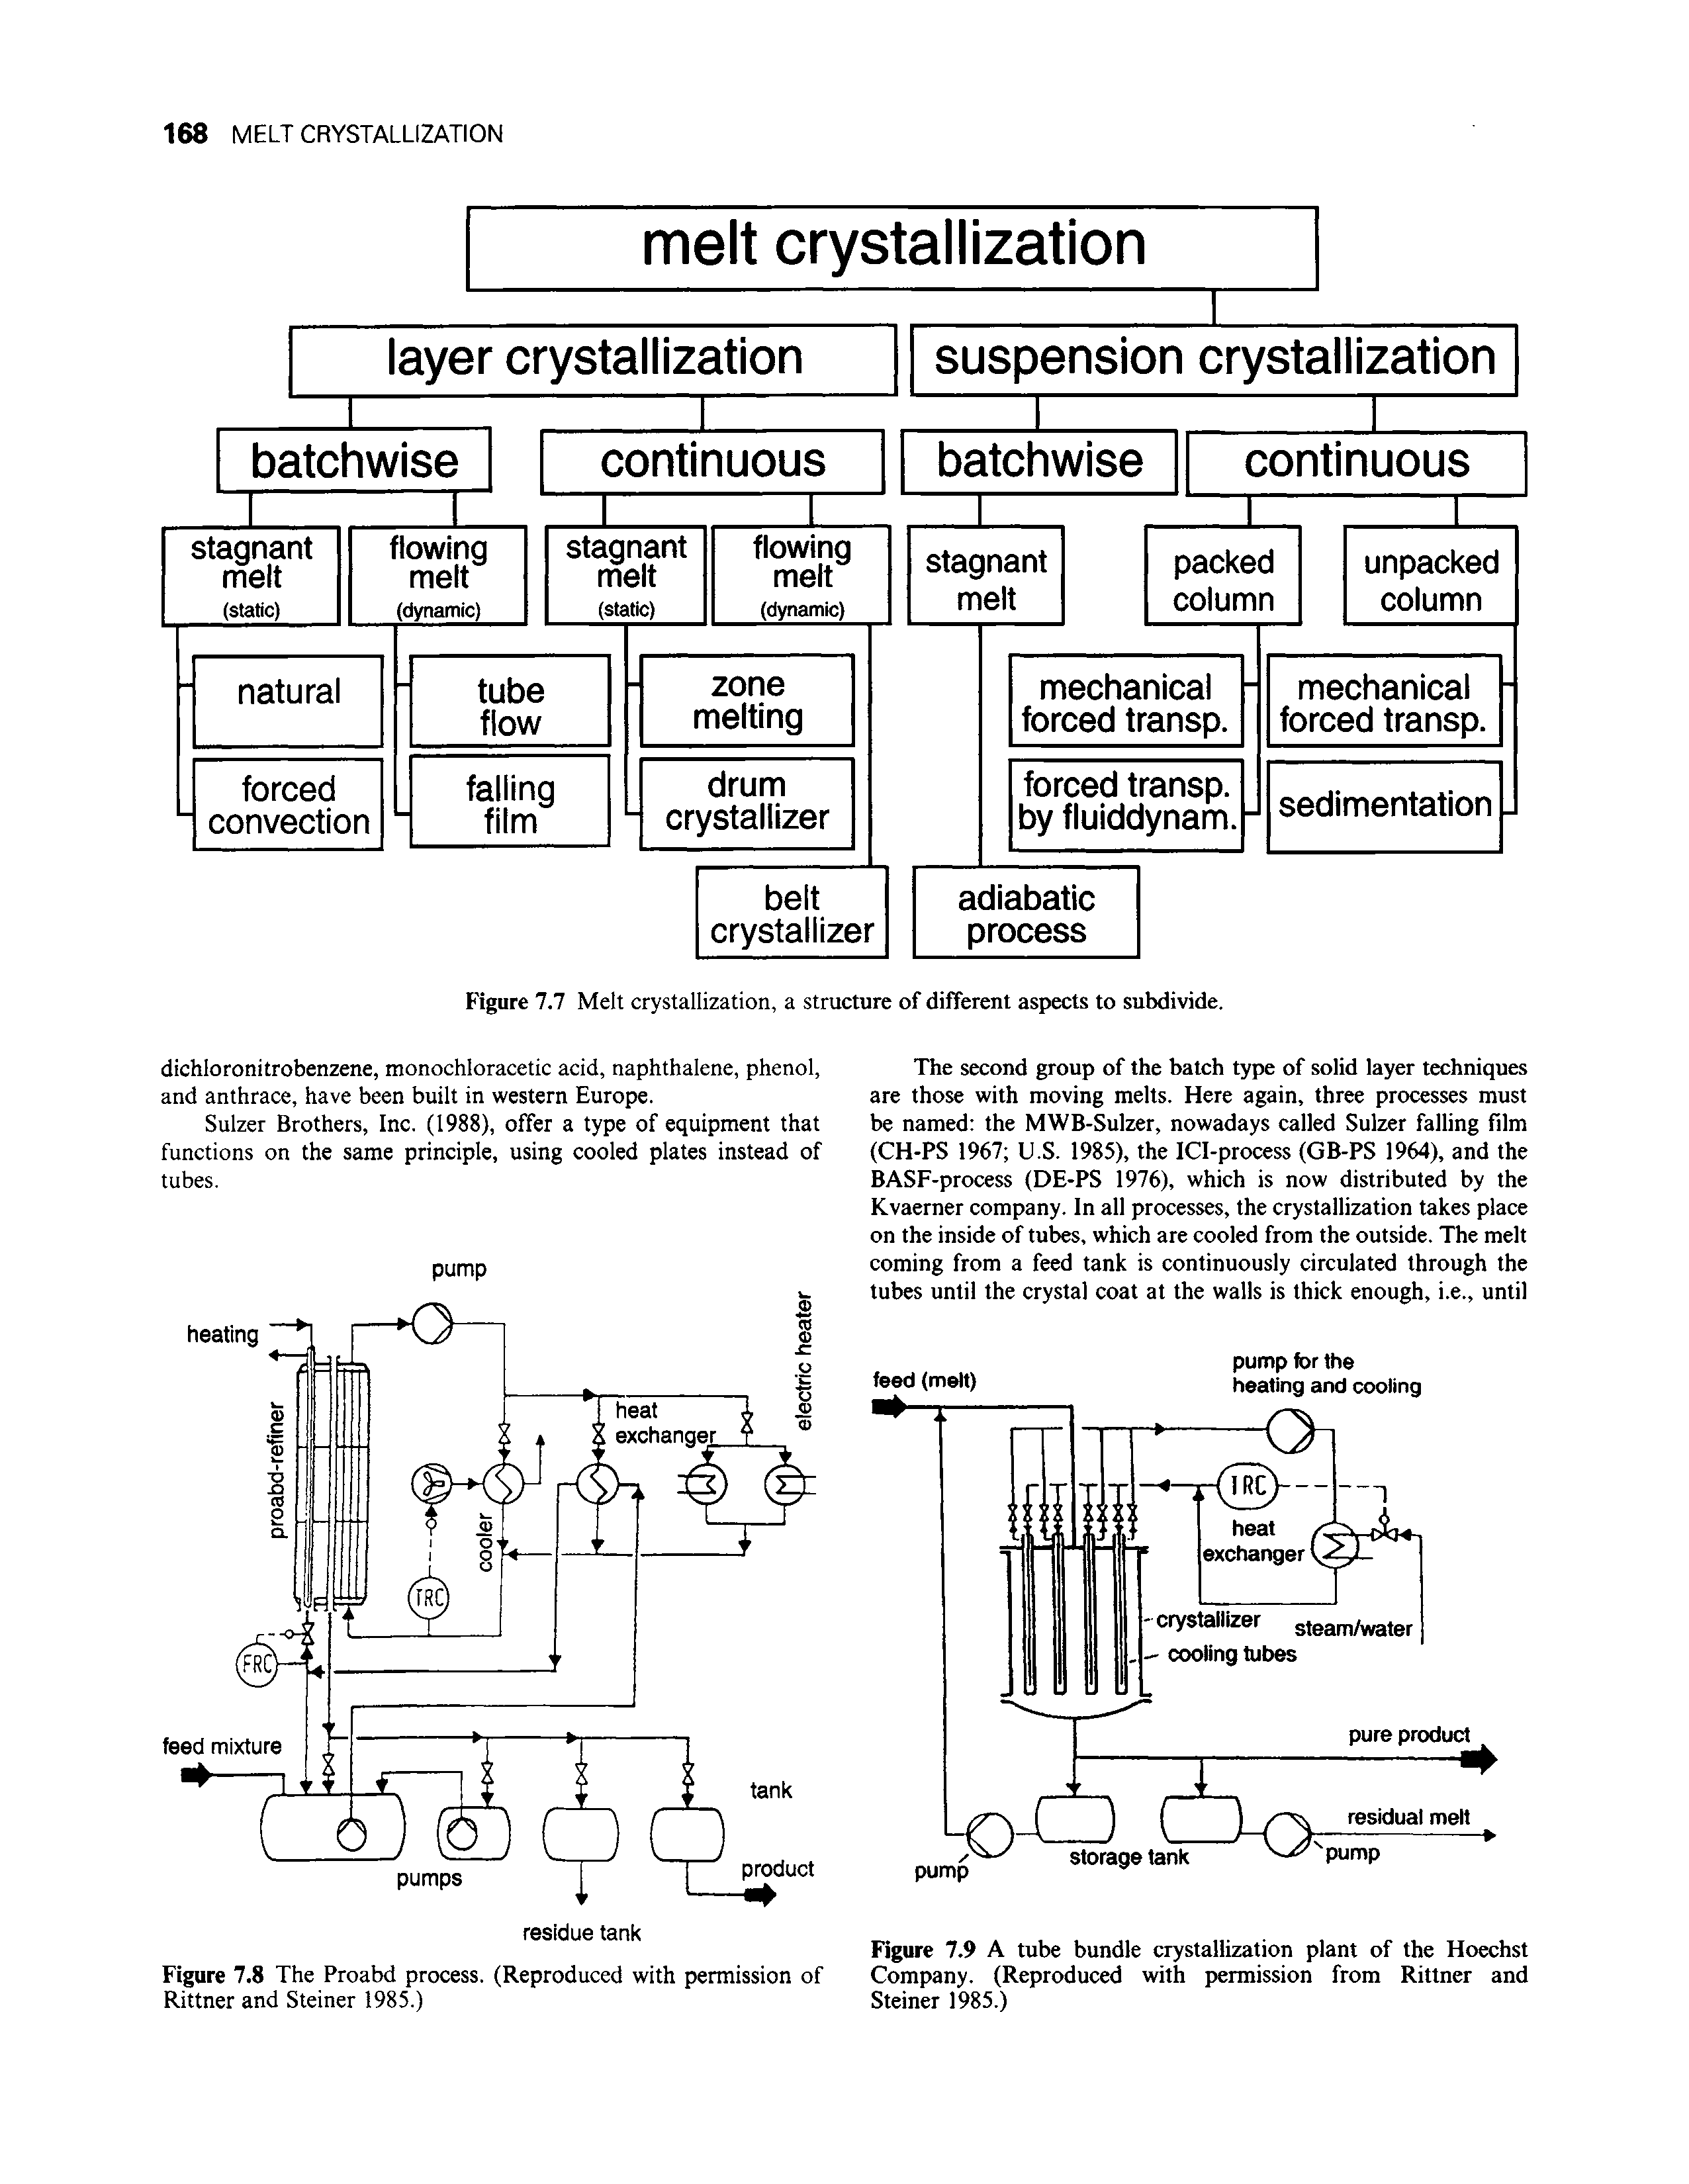 Figure 7.9 A tube bundle crystallization plant of the Hoechst Company. (Reproduced with permission from Rittner and Steiner 1985.)...